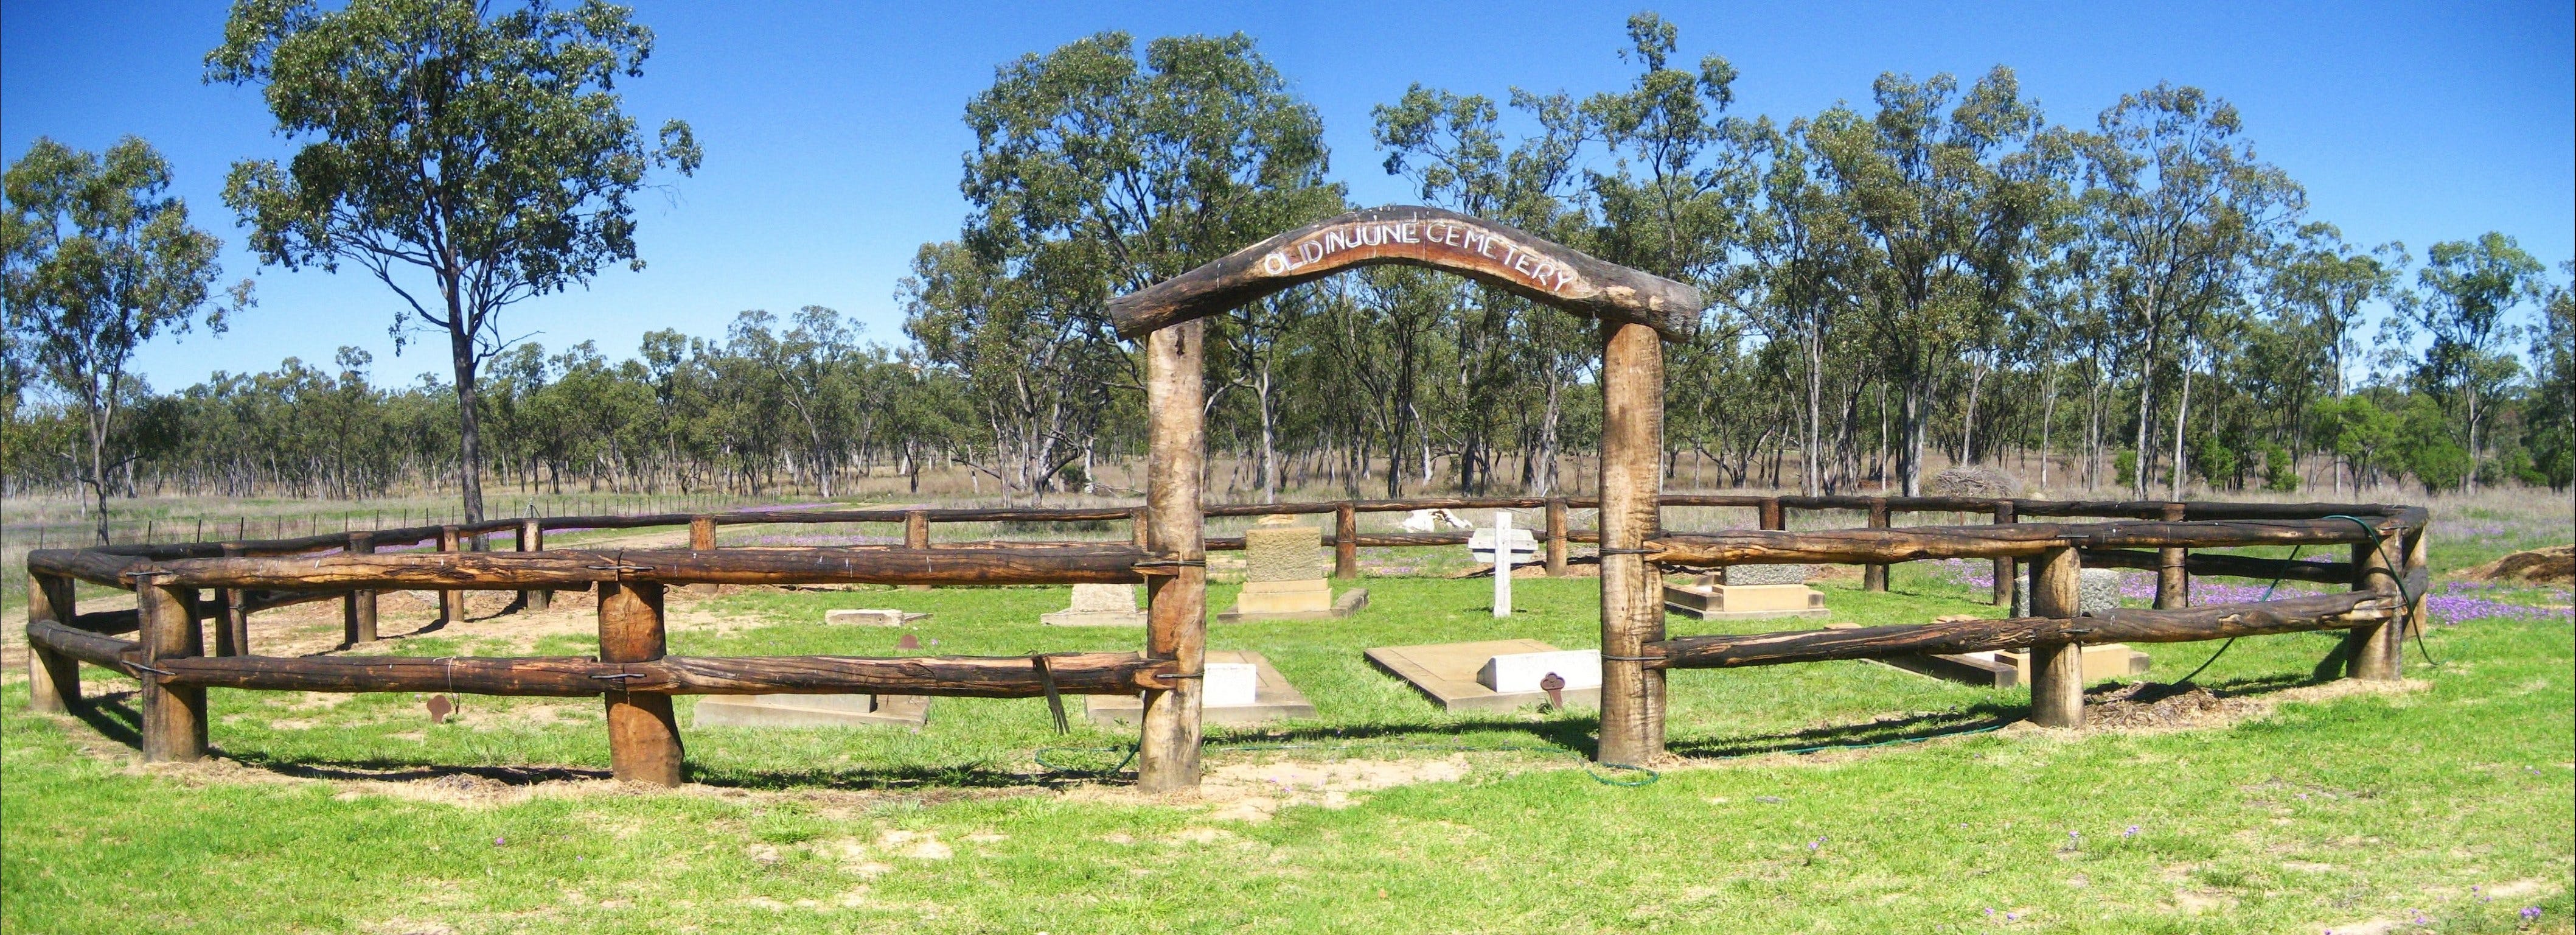 Old Injune Cemetery - Geraldton Accommodation